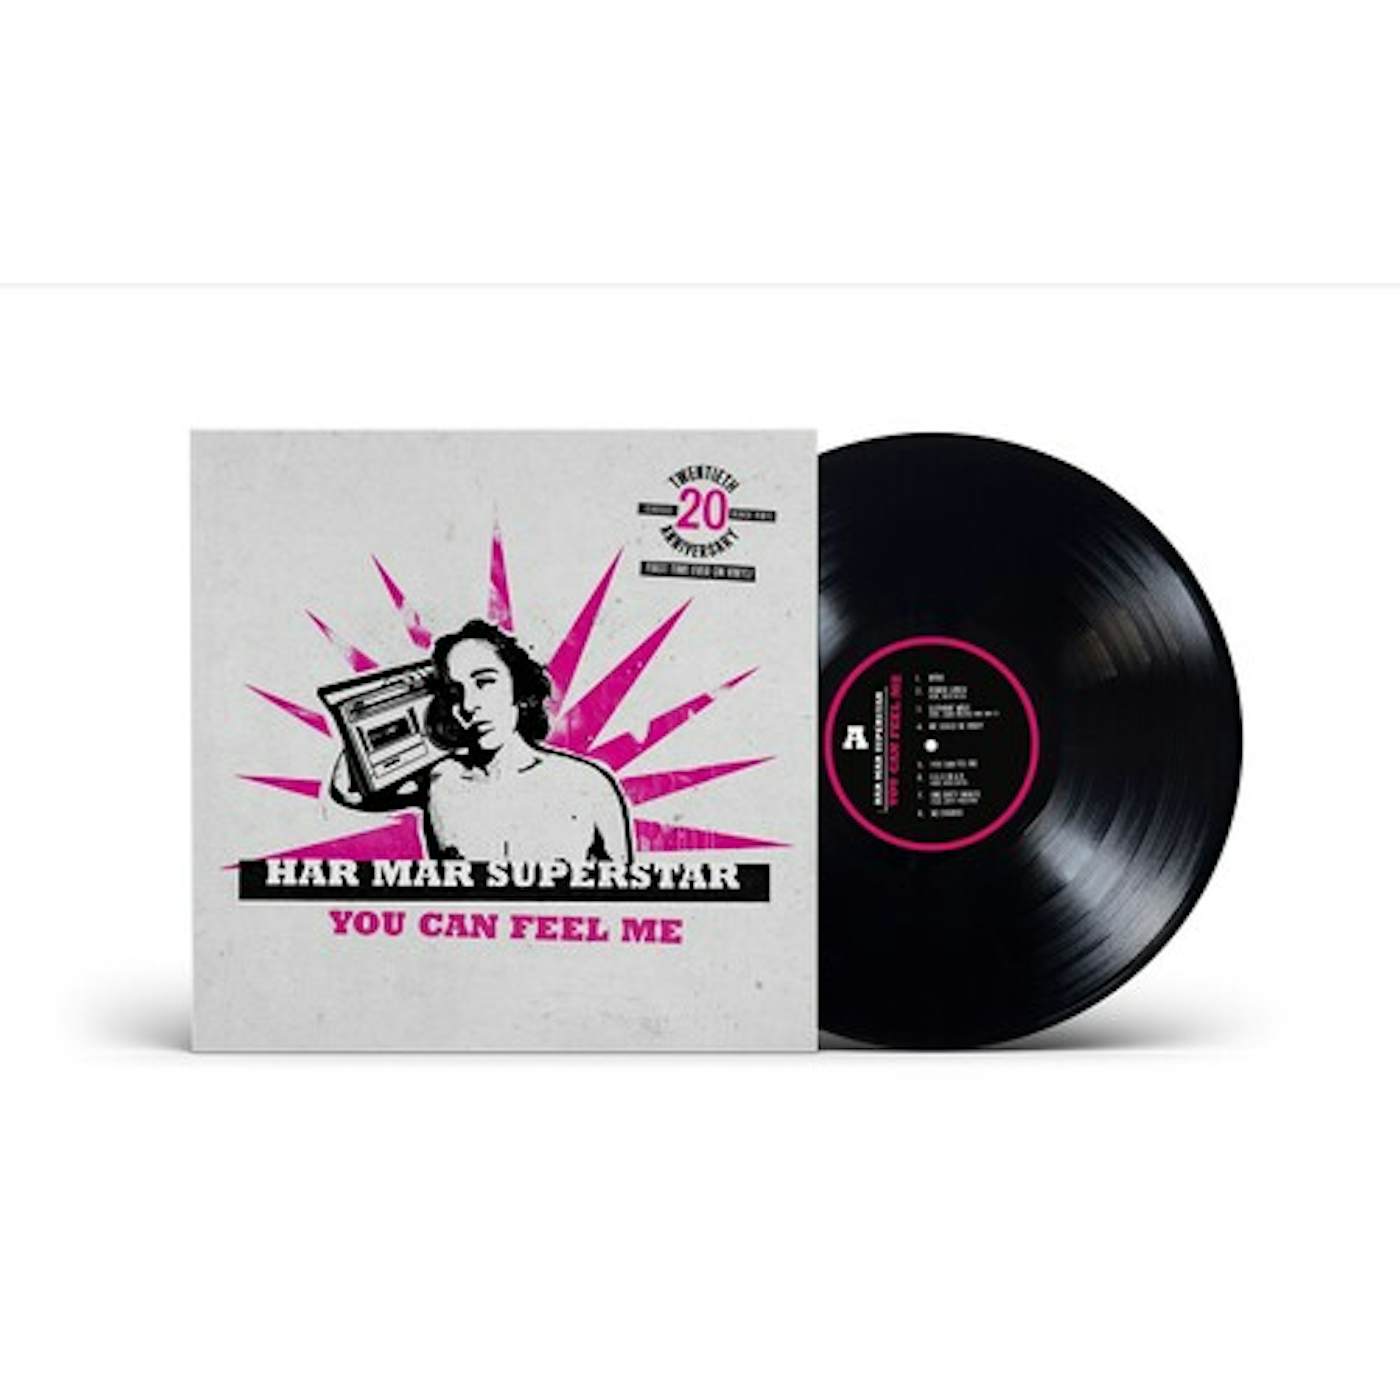 Har Mar Superstar You Can Feel Me - 20th Anniversary Edition Vinyl Record